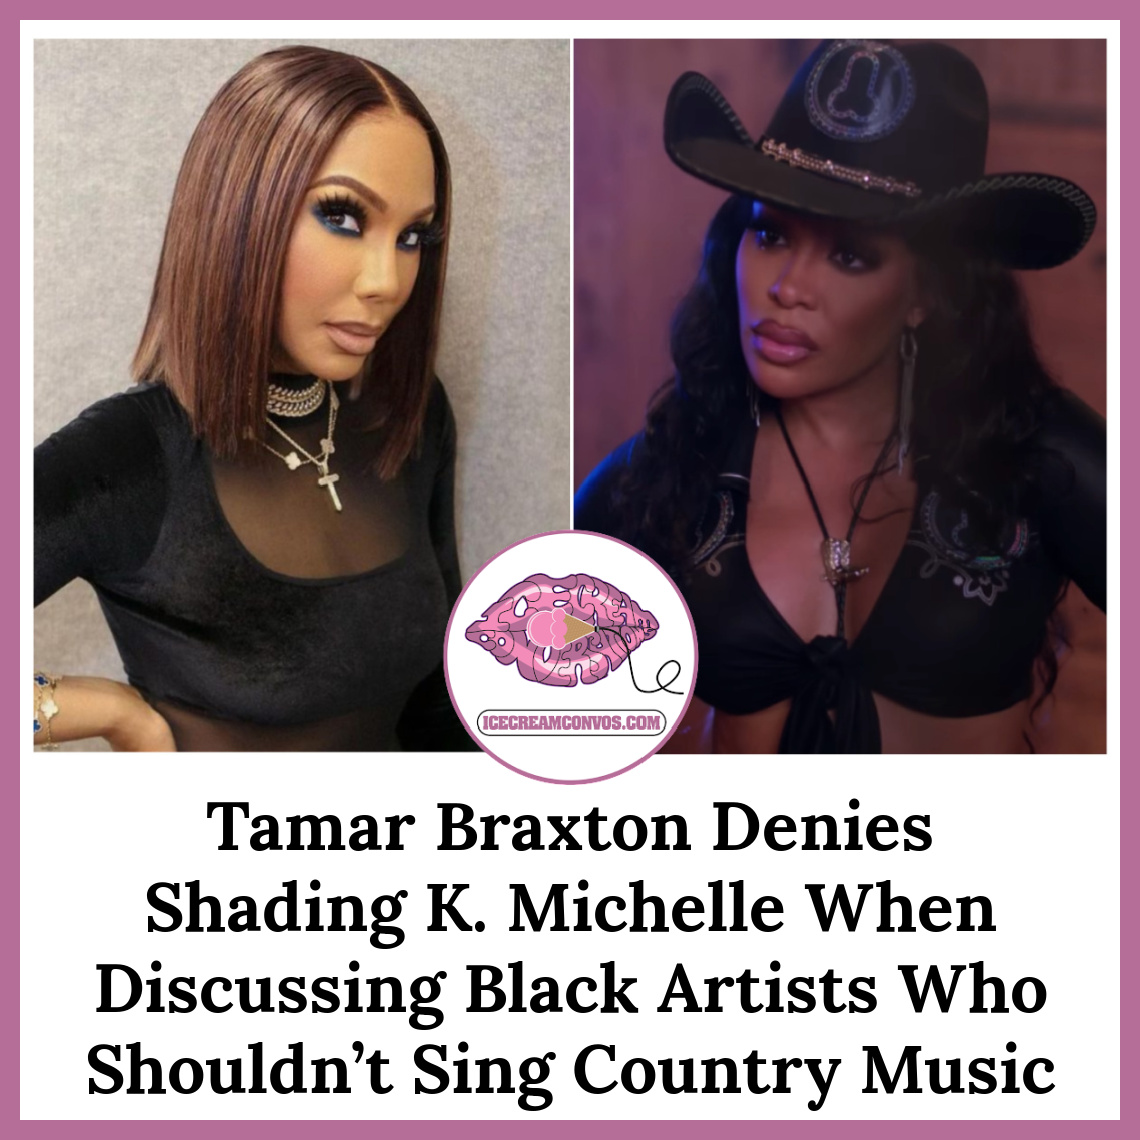 Tamar Braxton was accused of shading K. Michelle when discussing artists who shouldn’t sing “Black Country Music” due to sounding 'awful.' 🤦🏾‍♀️👀🍦

K seemingly responds... 👉🏾 bit.ly/4dvKyG3

#TamarBraxton #KMichelle #QuickQuotes #ForTheRecord #Trending #IceCreamConvos